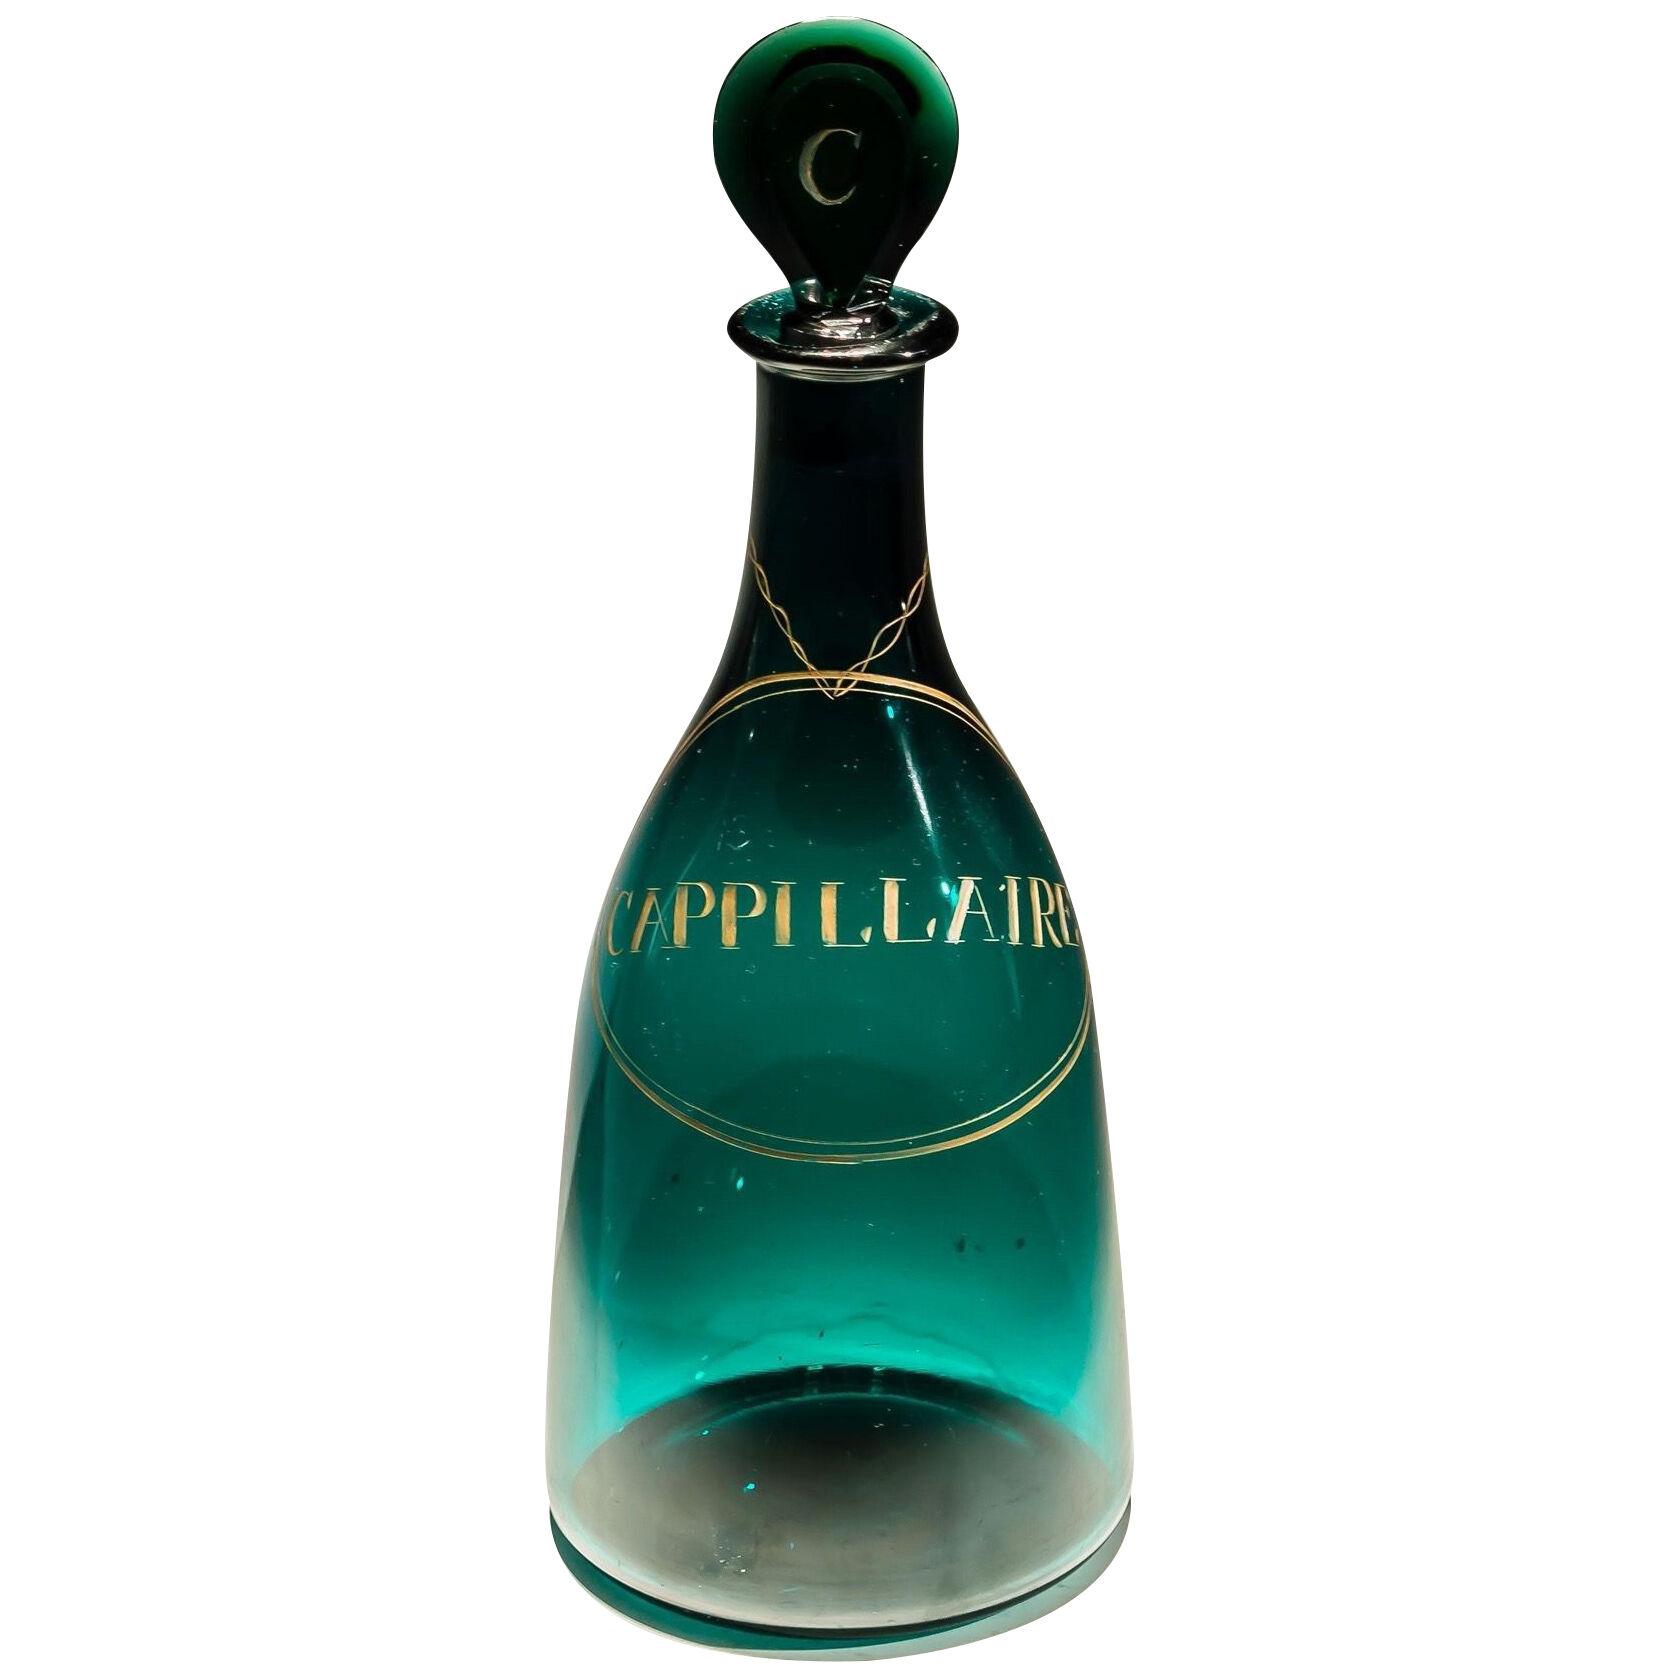 A VERY RARE GREEN DECANTER LABELLED CAPPILLAIRE